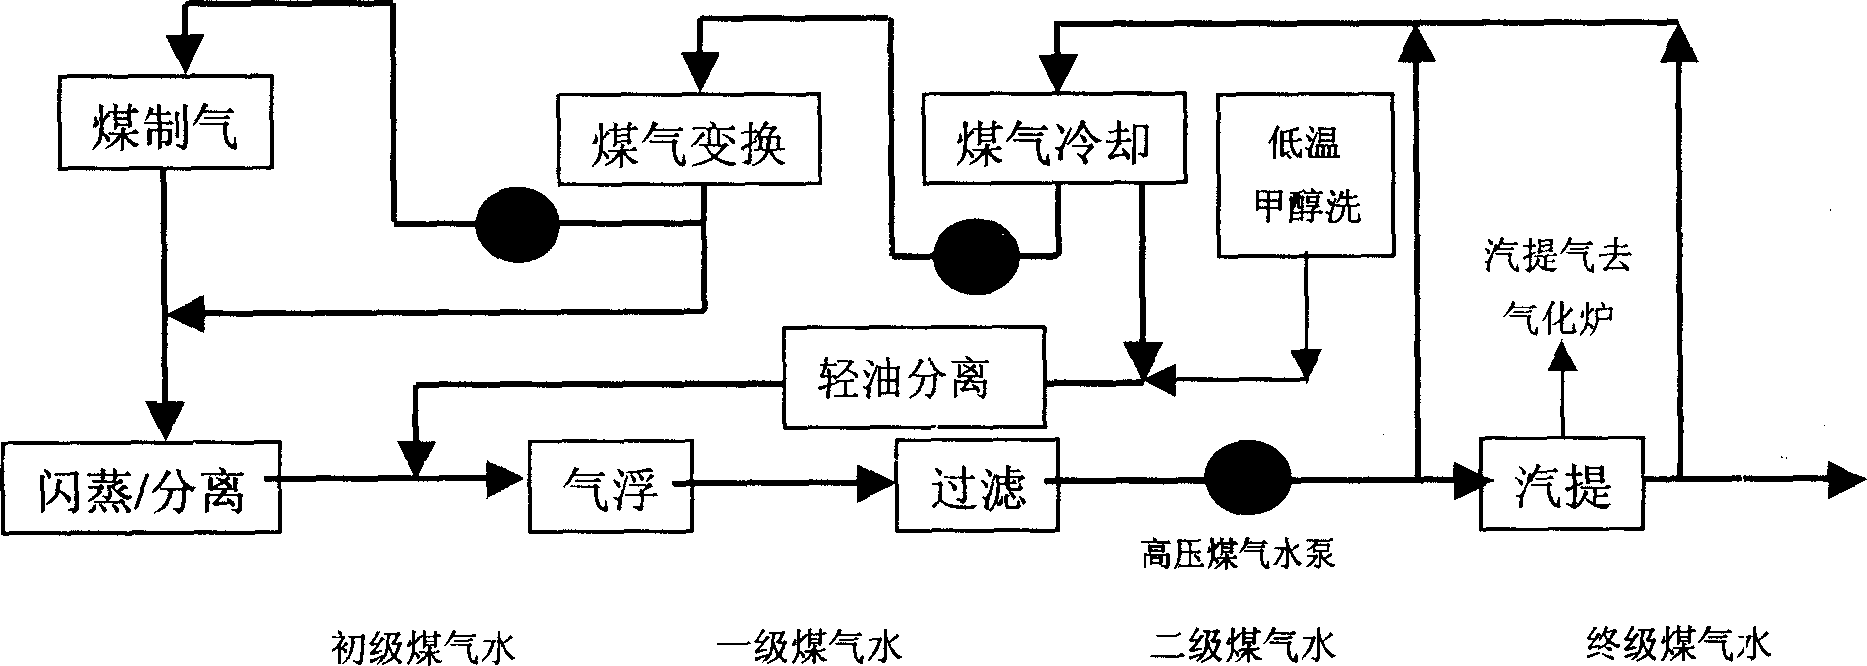 Process for treating gas water for producing gas by lurgi furnace